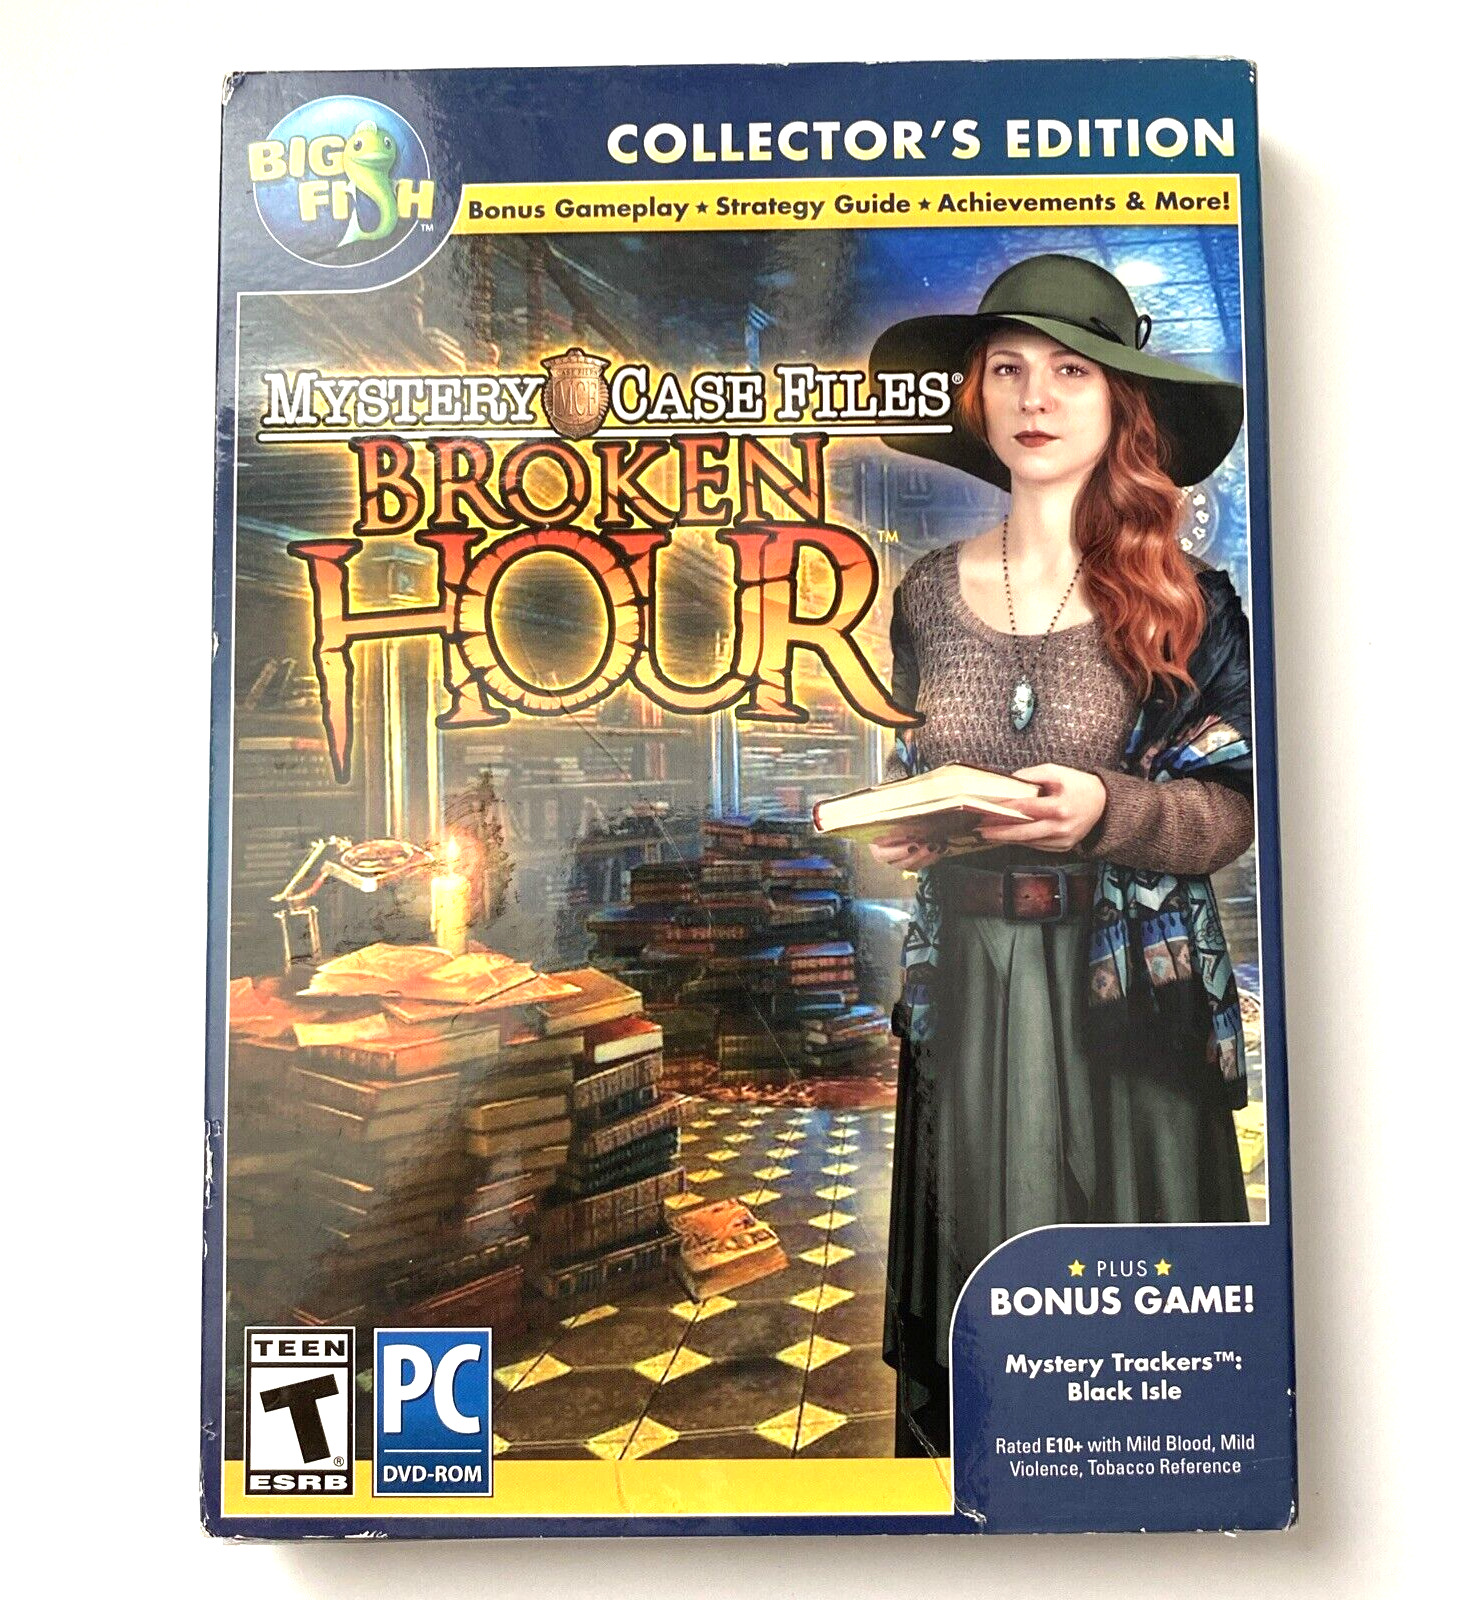 Big Fish Mystery Case Files Broken Hour Collectors Edition PC Game DVD-ROM ~ NEW